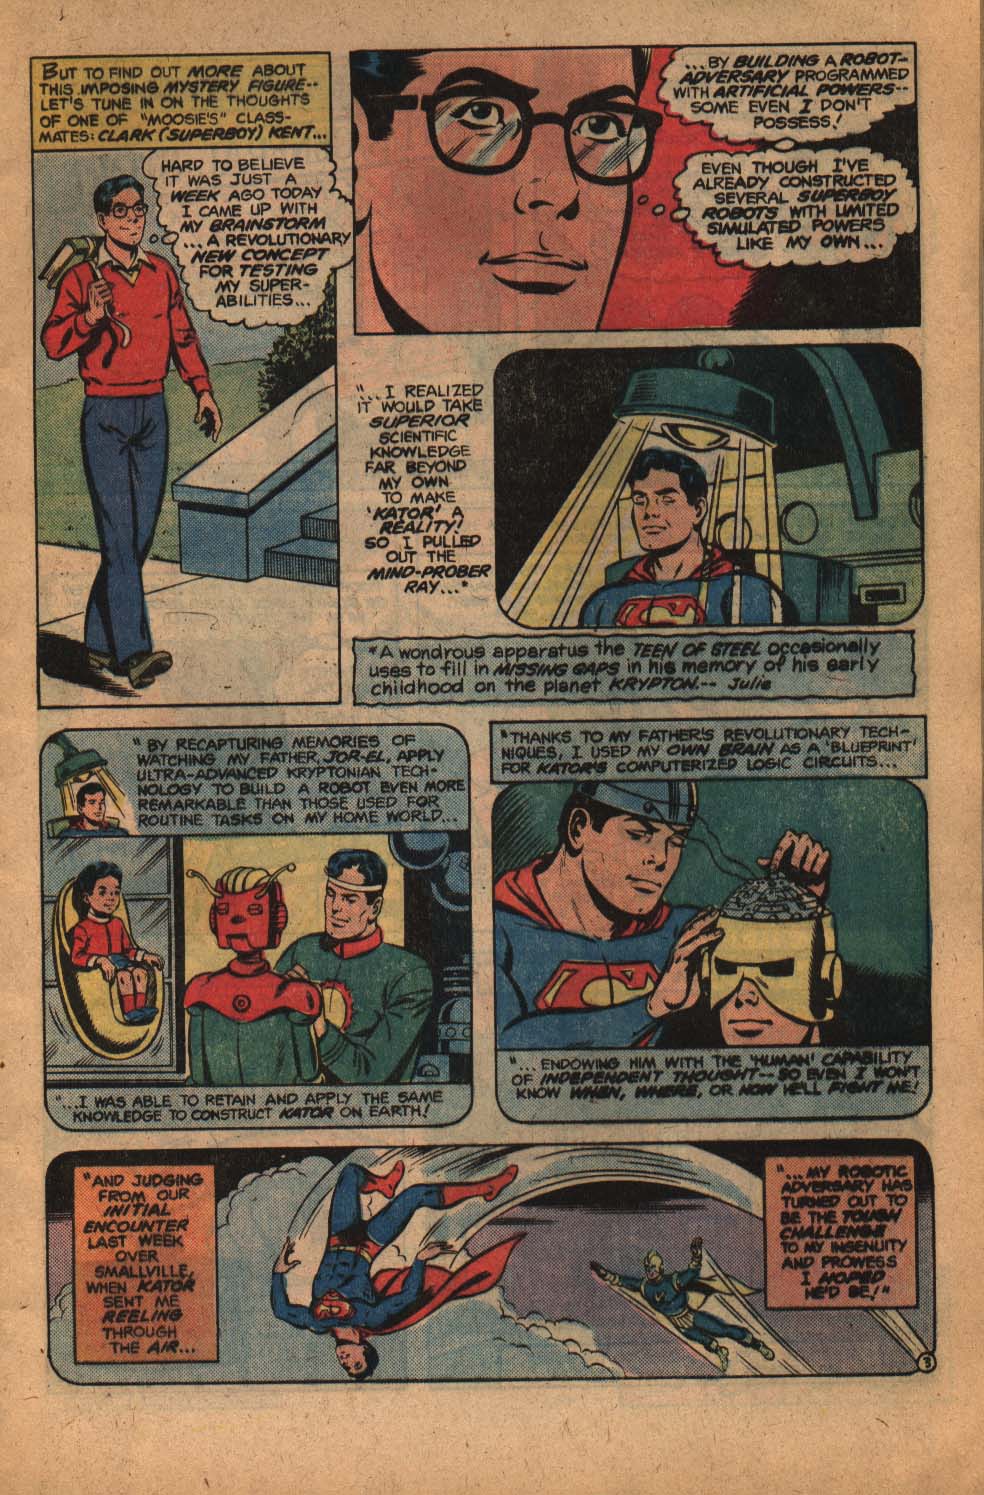 The New Adventures of Superboy 18 Page 4